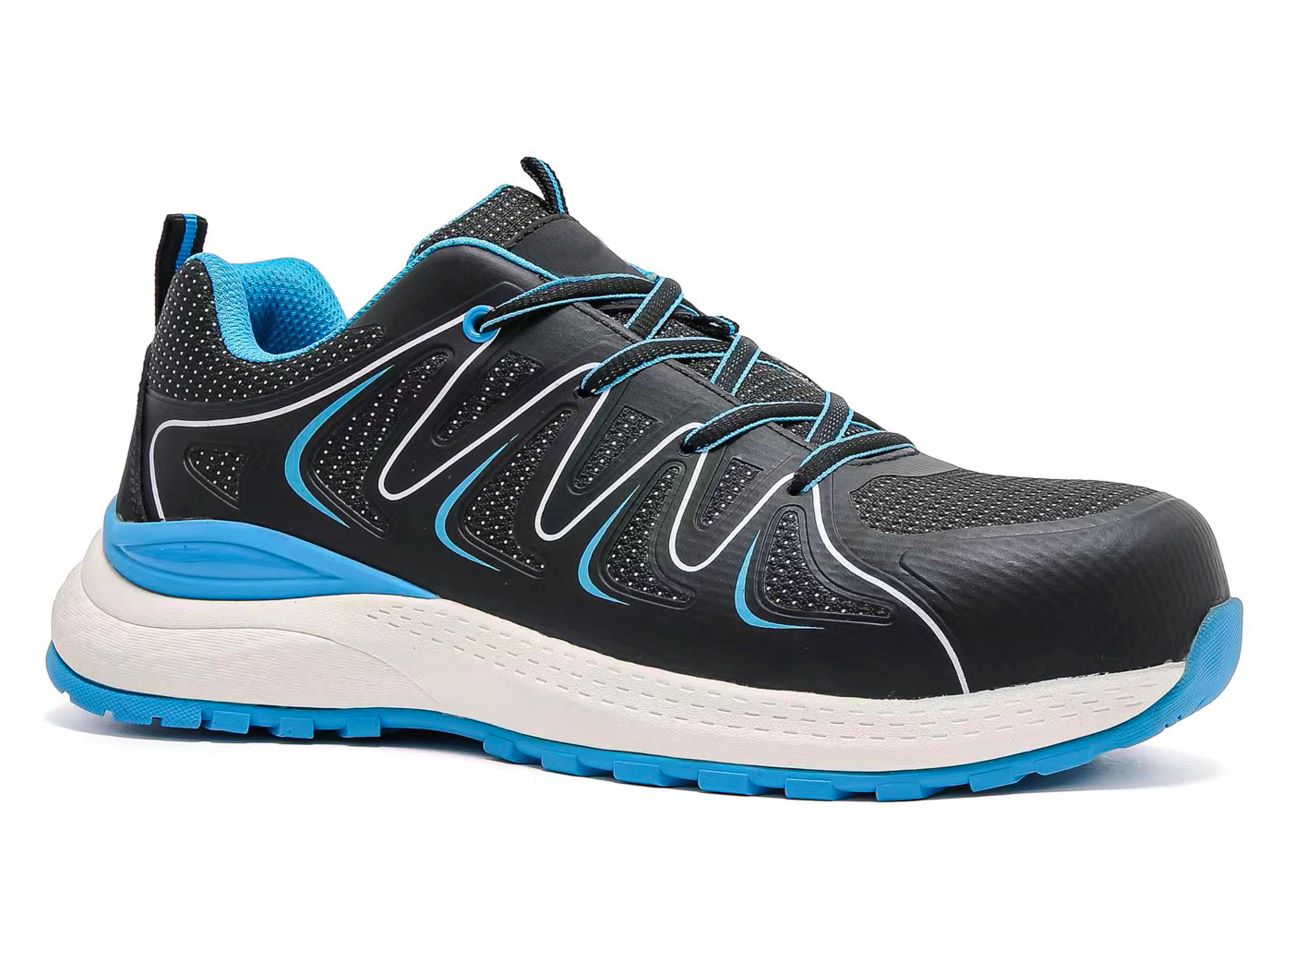 Premium Comfort Safety Trainers with Advanced Slip-Resistant Technology